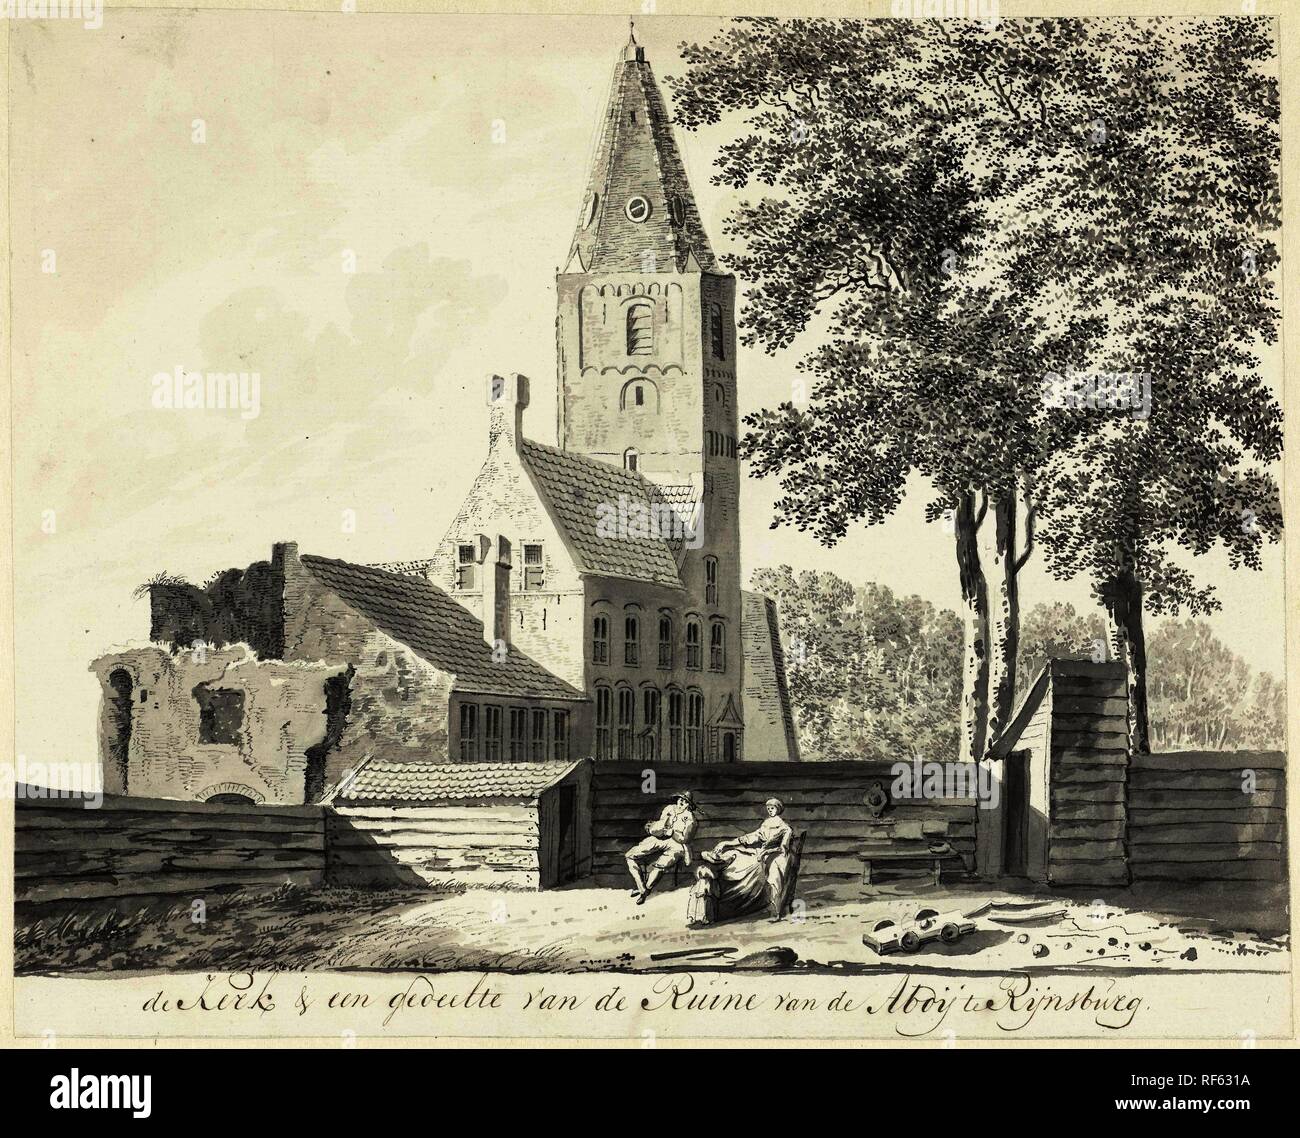 Church and part of the ruin of the abbey of Rijnsburg. Draughtsman: Hendrik Tavenier. Dating: 1784. Measurements: h 230 mm × w 286 mm. Museum: Rijksmuseum, Amsterdam. Stock Photo